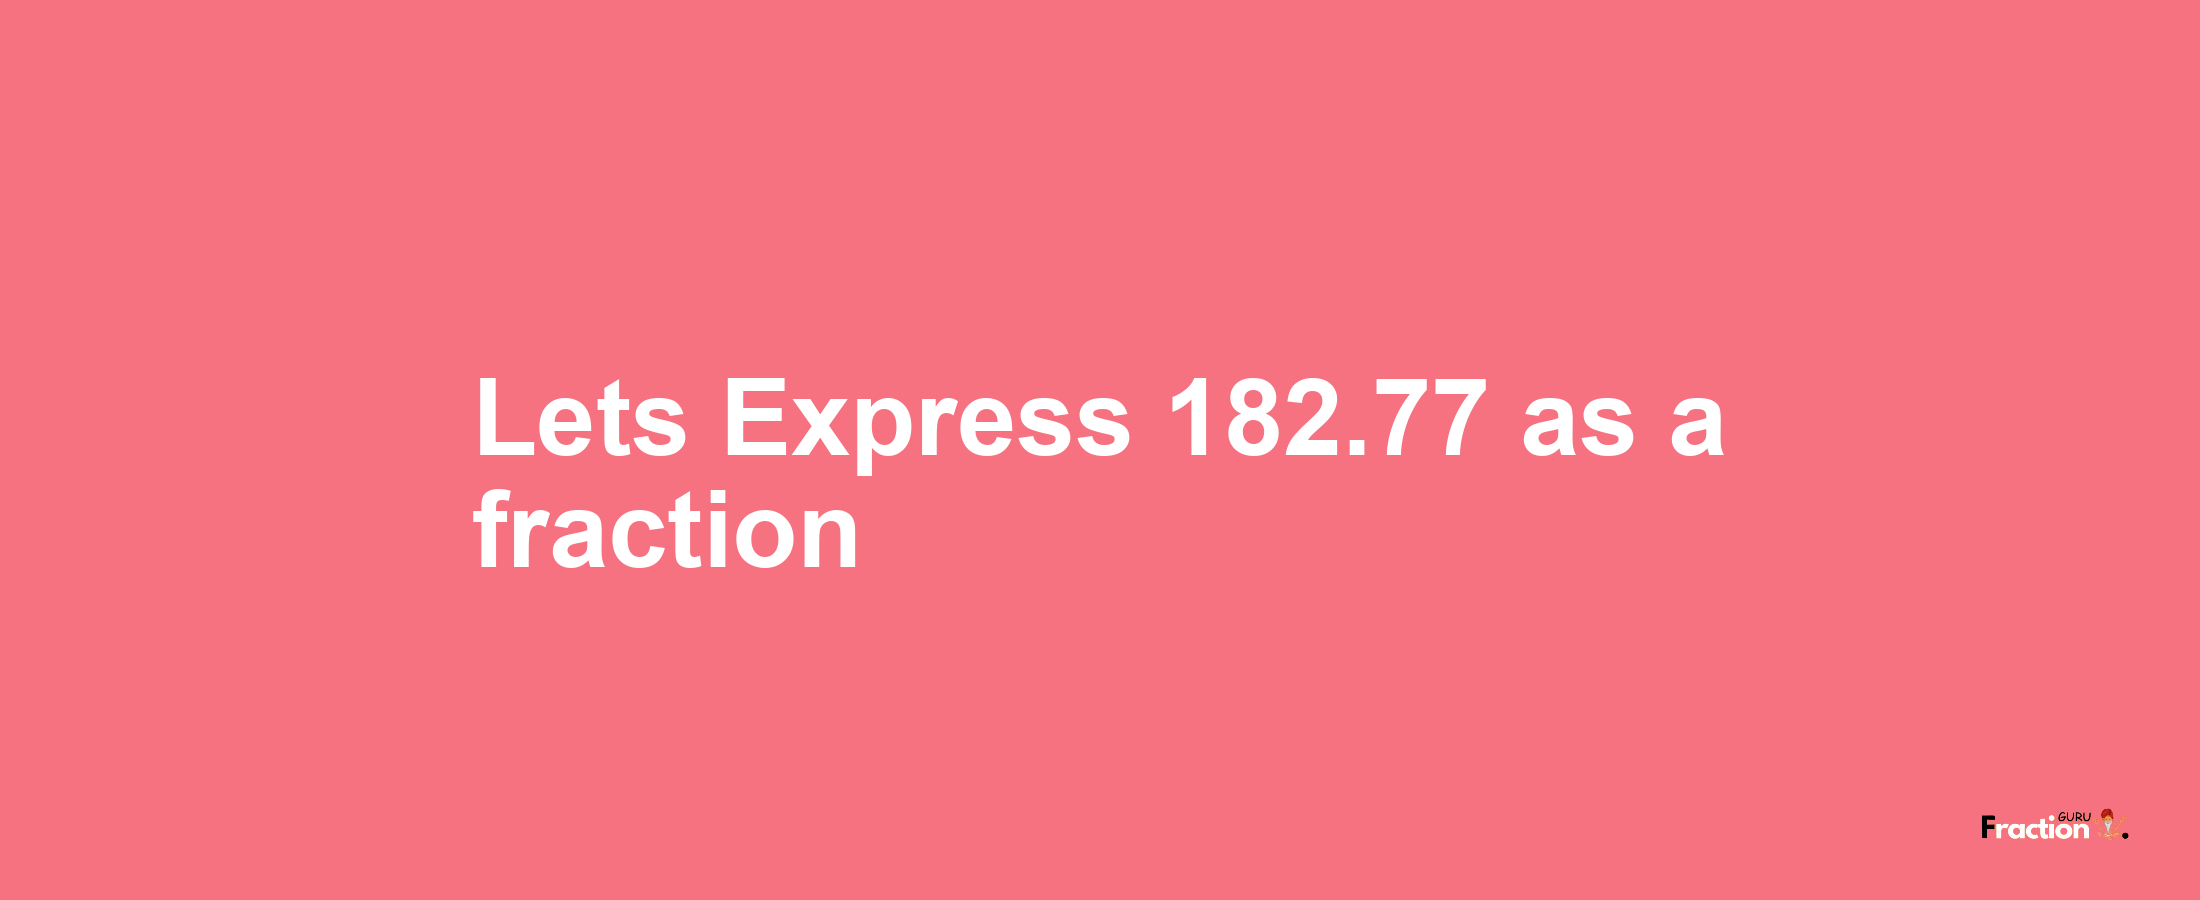 Lets Express 182.77 as afraction